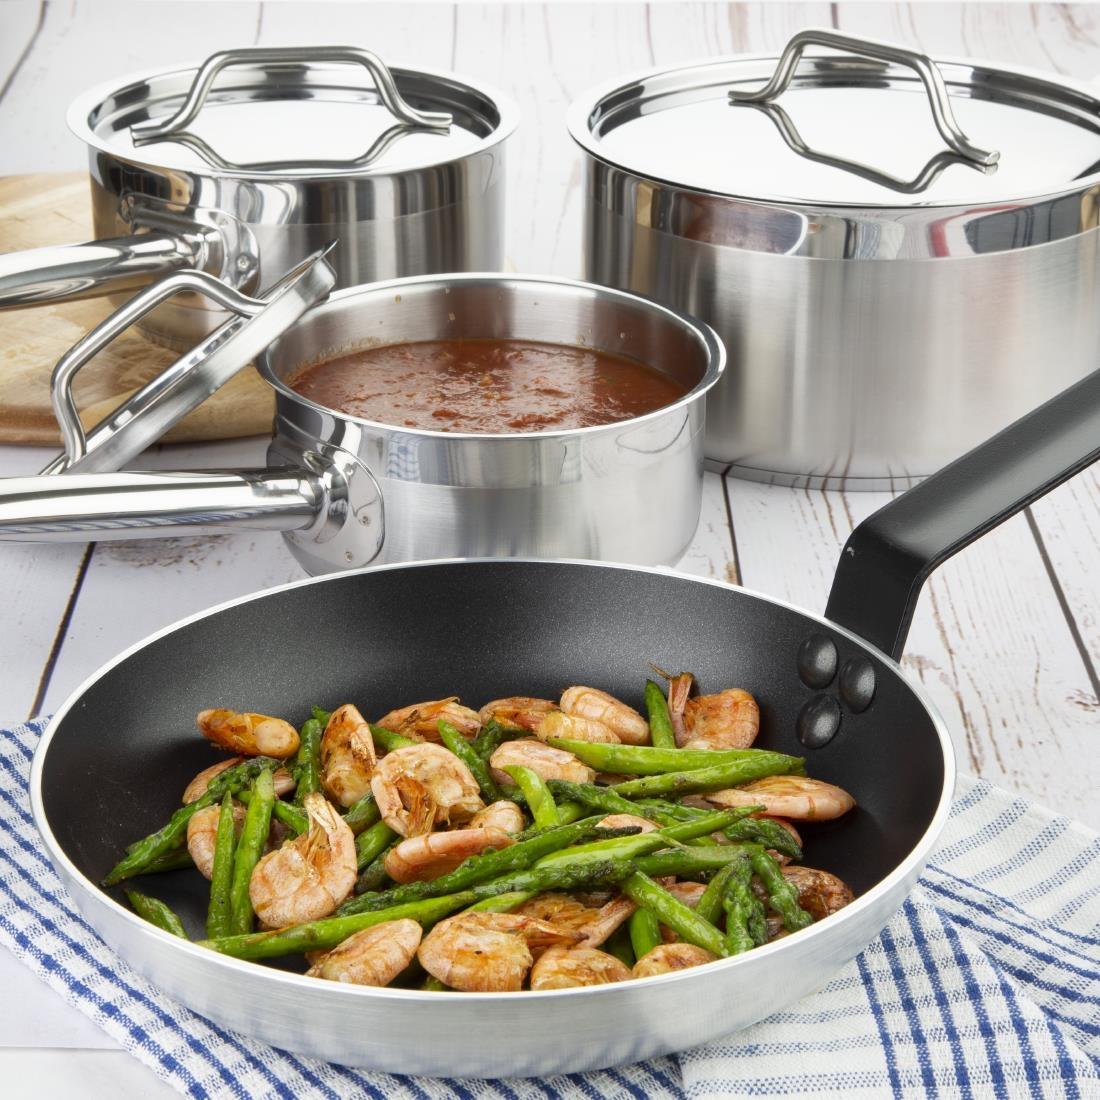 Nisbets Essentials Cook Like A Pro 4-Piece Saucepan and Frying Pan Set